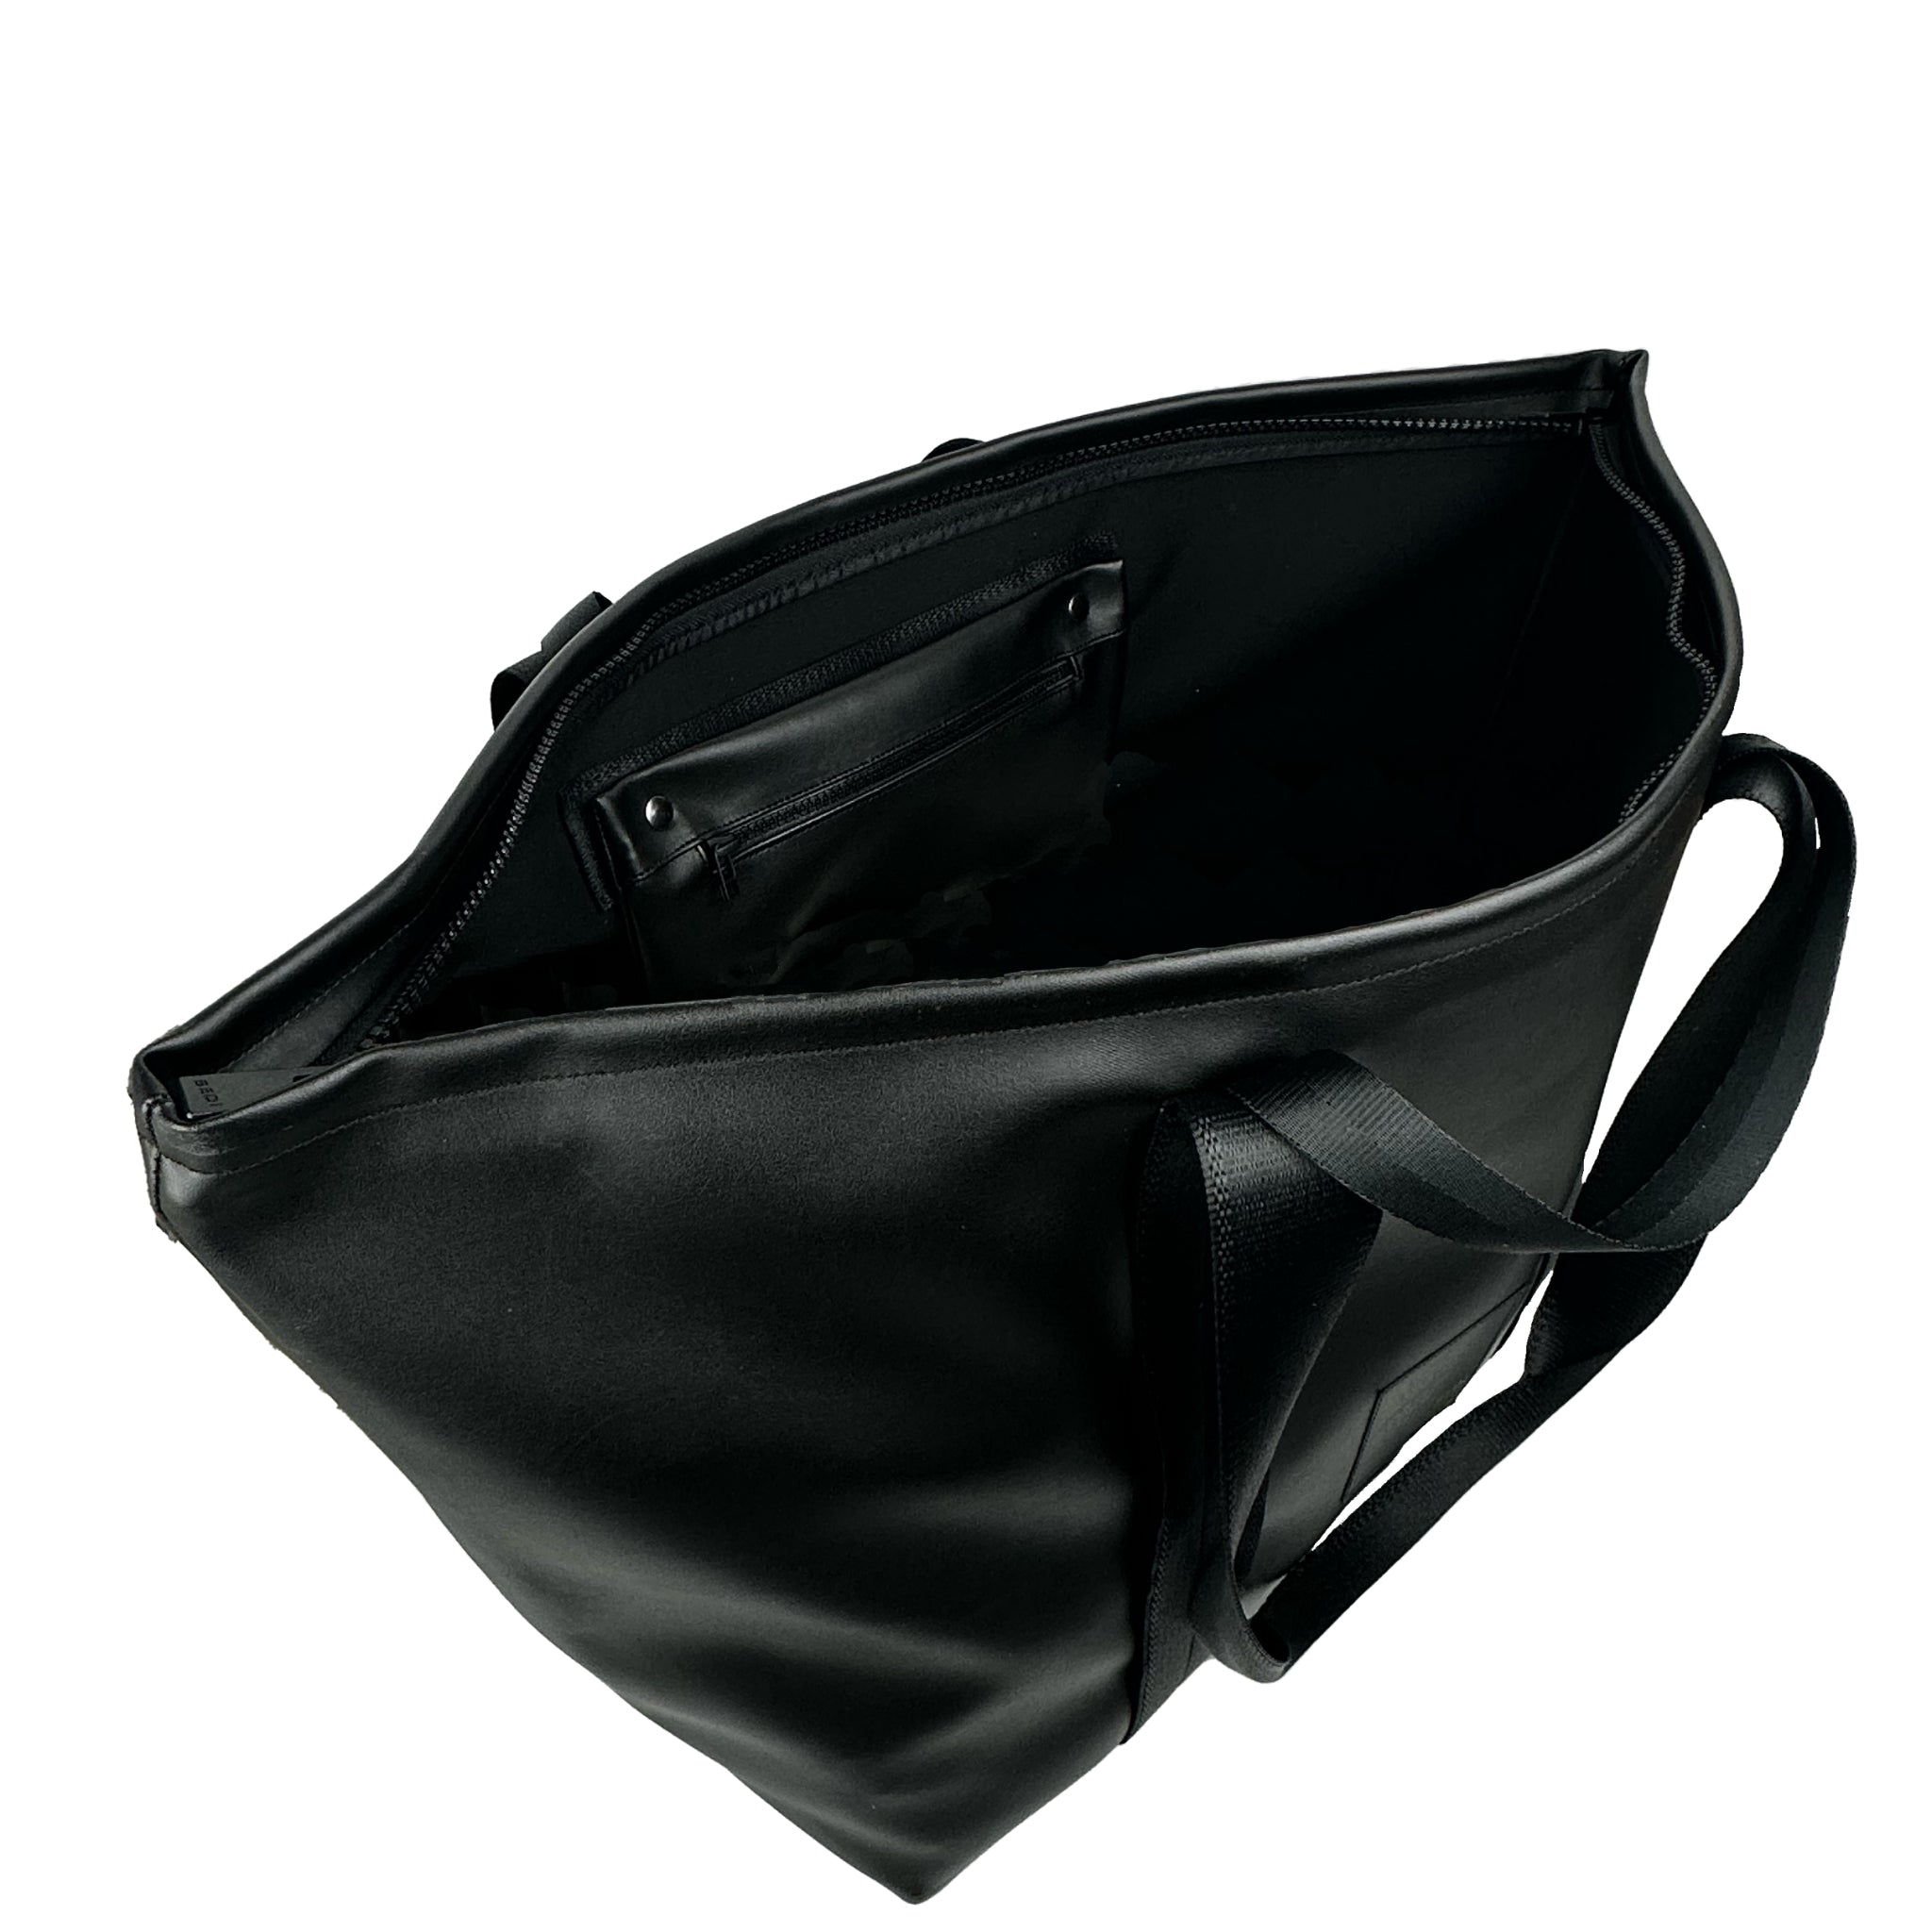 angled view of inside of a Black weekender in vegan leather (desserto) on a white background.